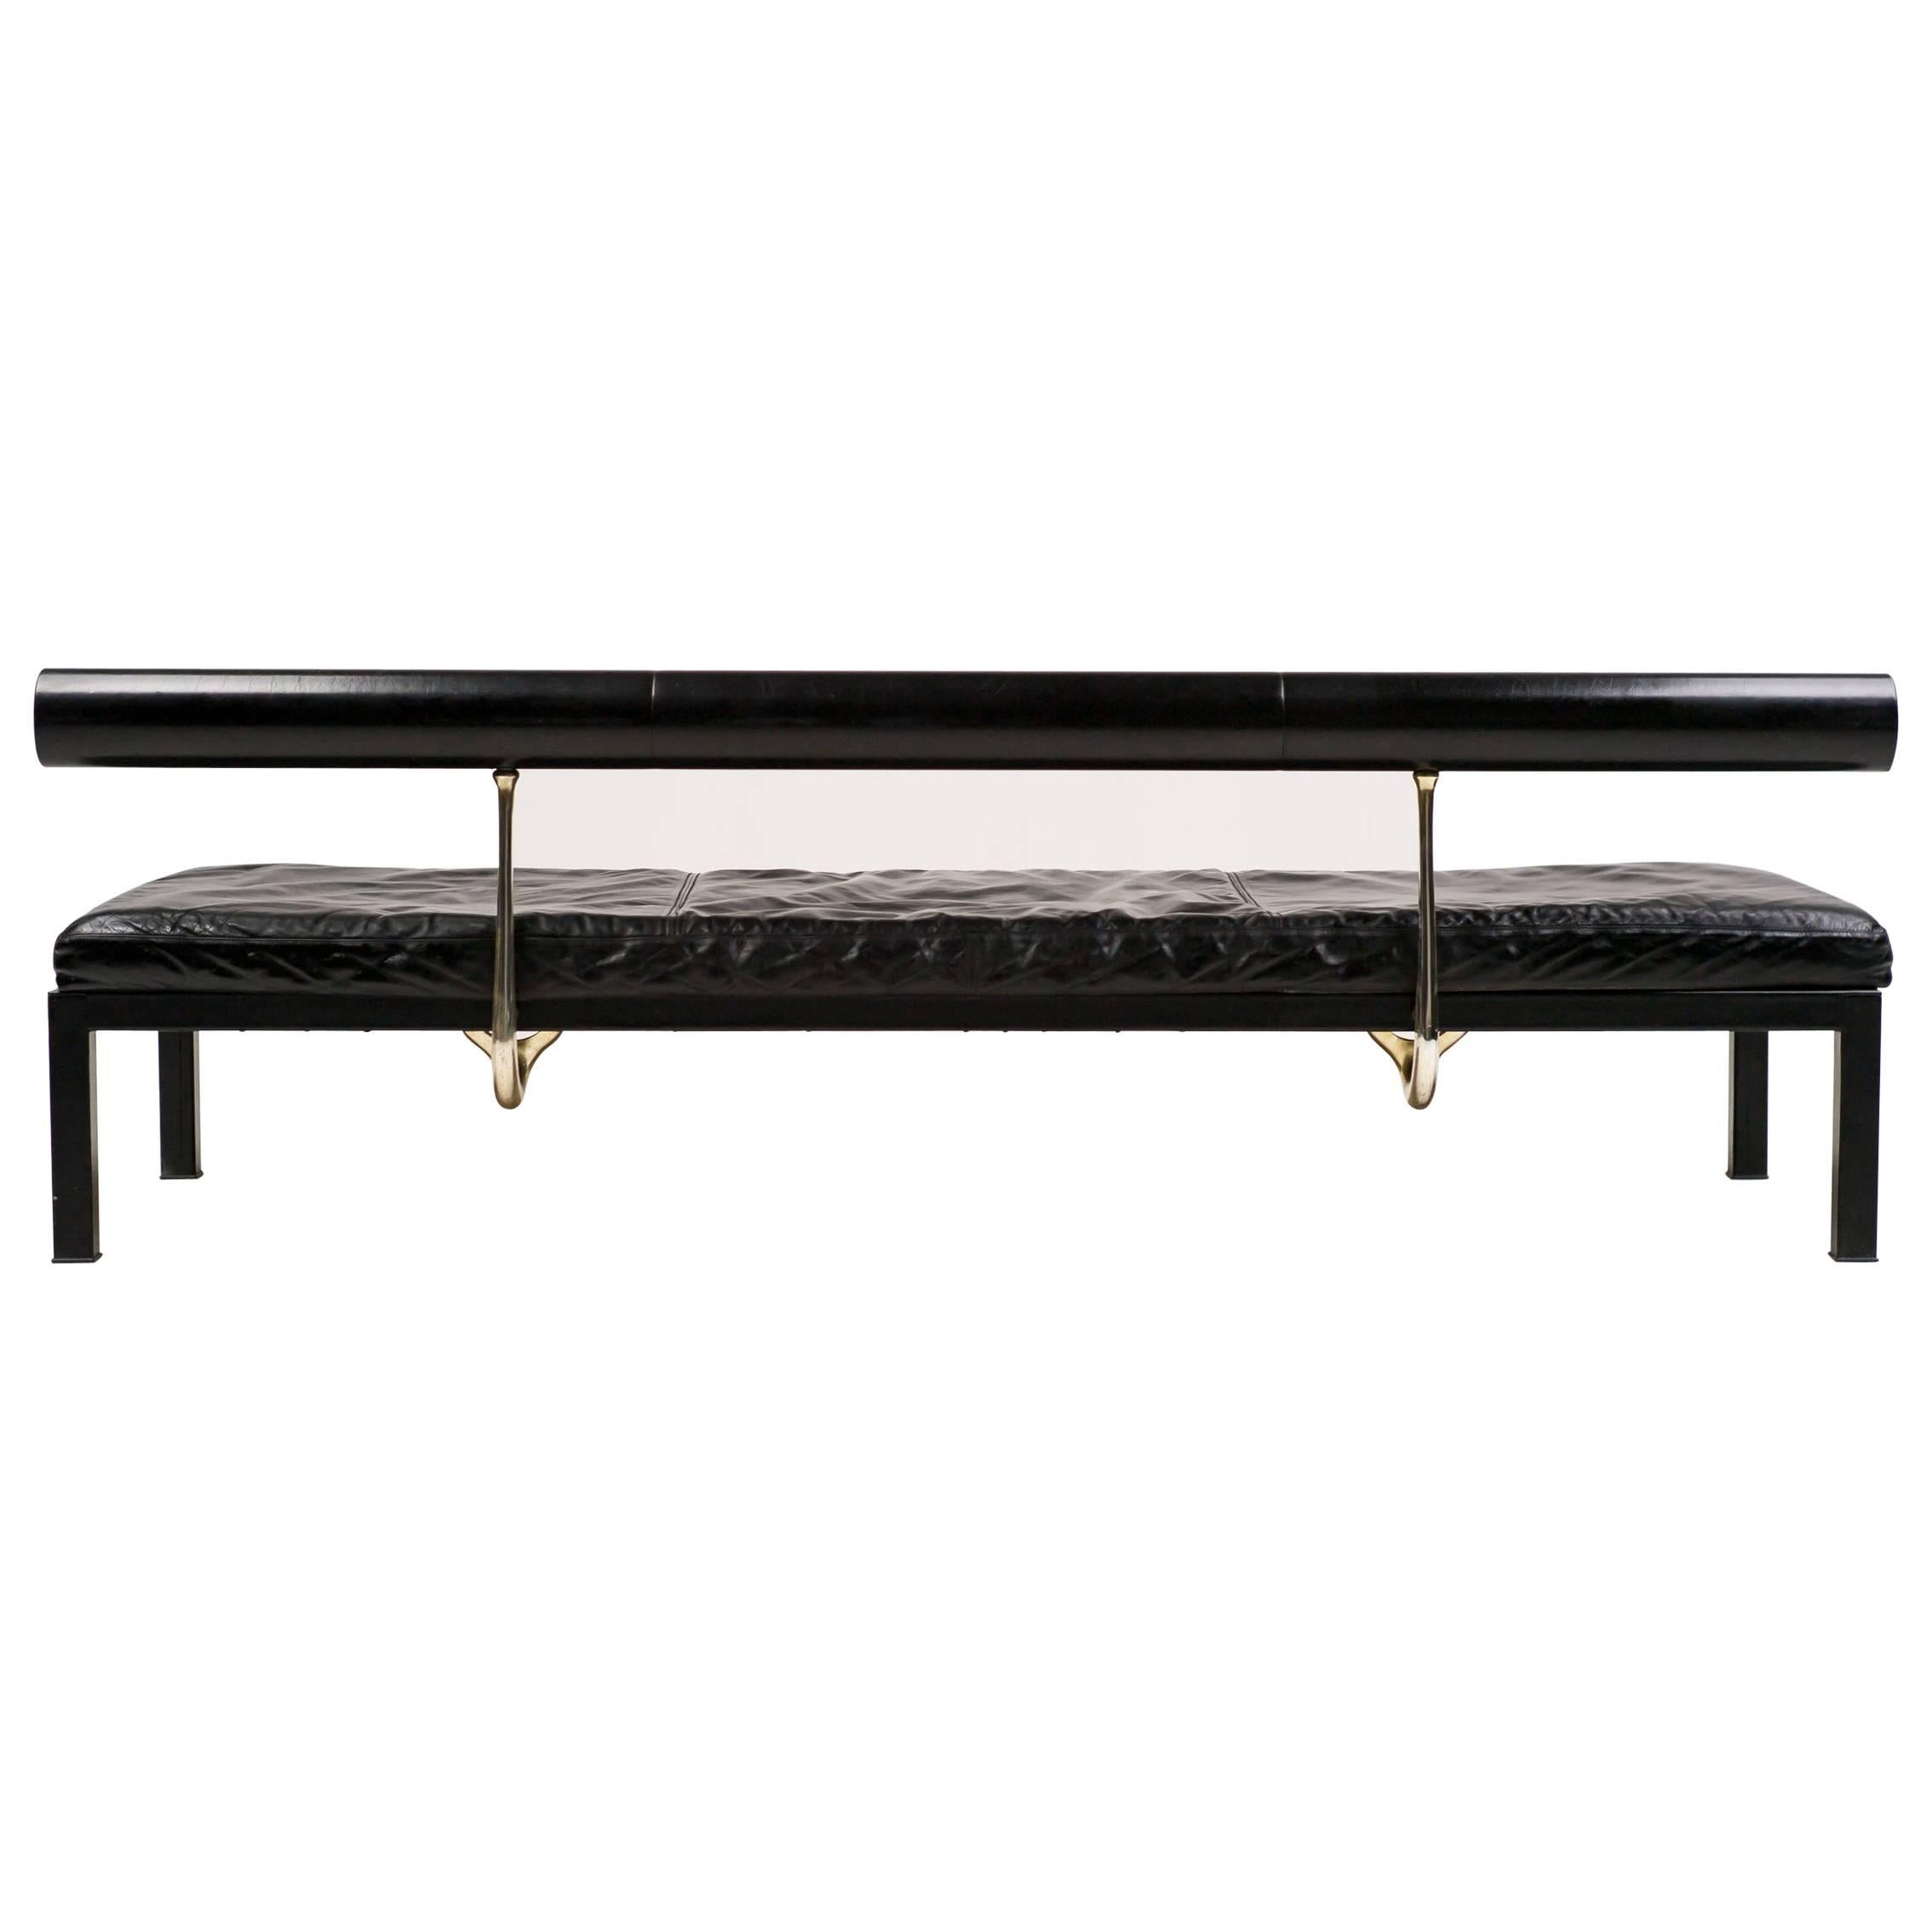 Black Leather Sity Daybed by Antonio Citterio for B&B Italia